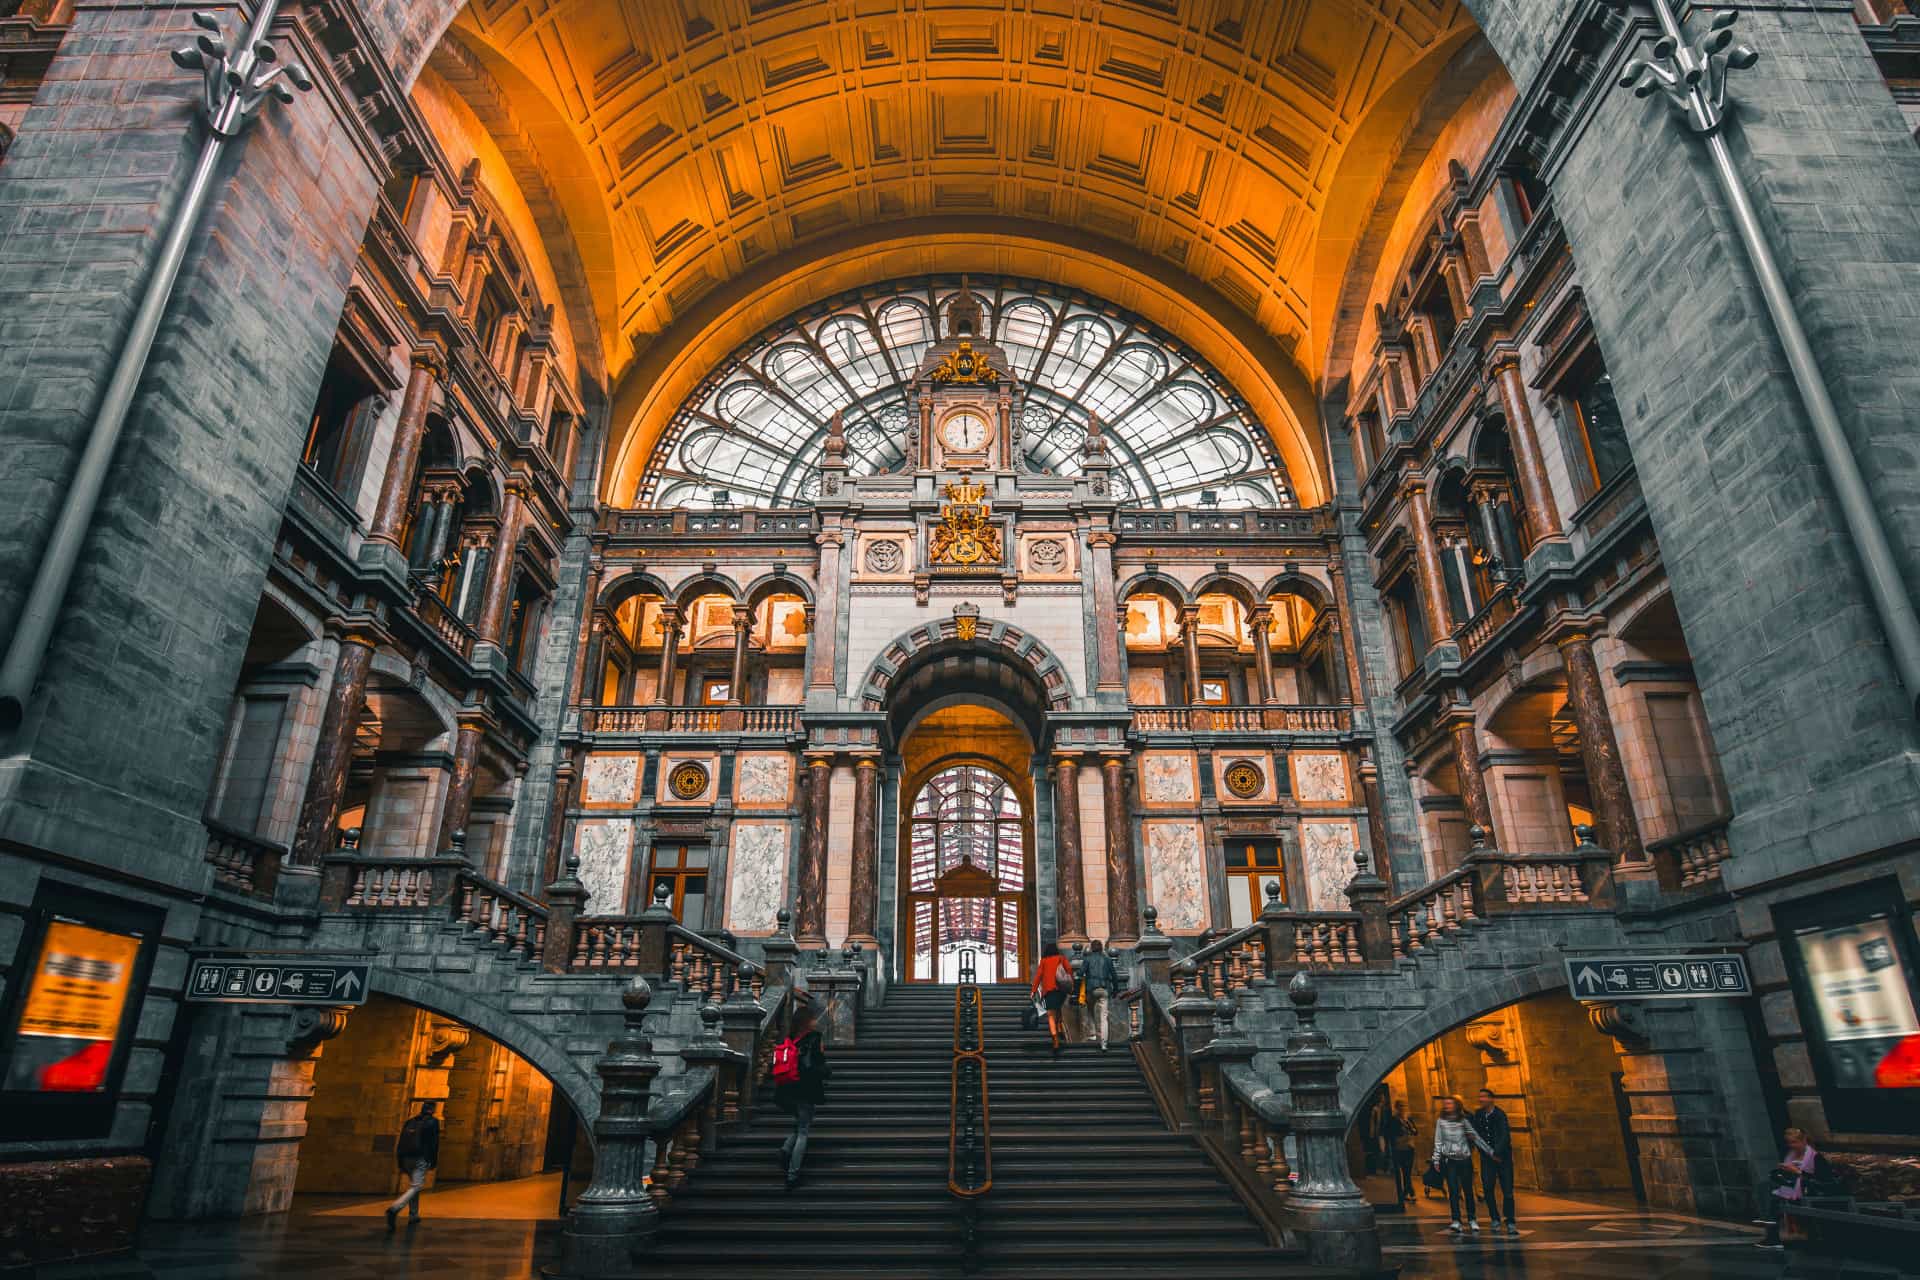 The majestic Antwerpen-Centraal train station is a real architectural gem. This eclectic station, originally constructed between 1895 and 1905, was deemed the world's most beautiful railway station in 2014 by <a href="https://mashable.com/2014/08/23/beautiful-railway-stations/?europe=true#944Vl340auq3" rel="noopener">Mashable</a>.